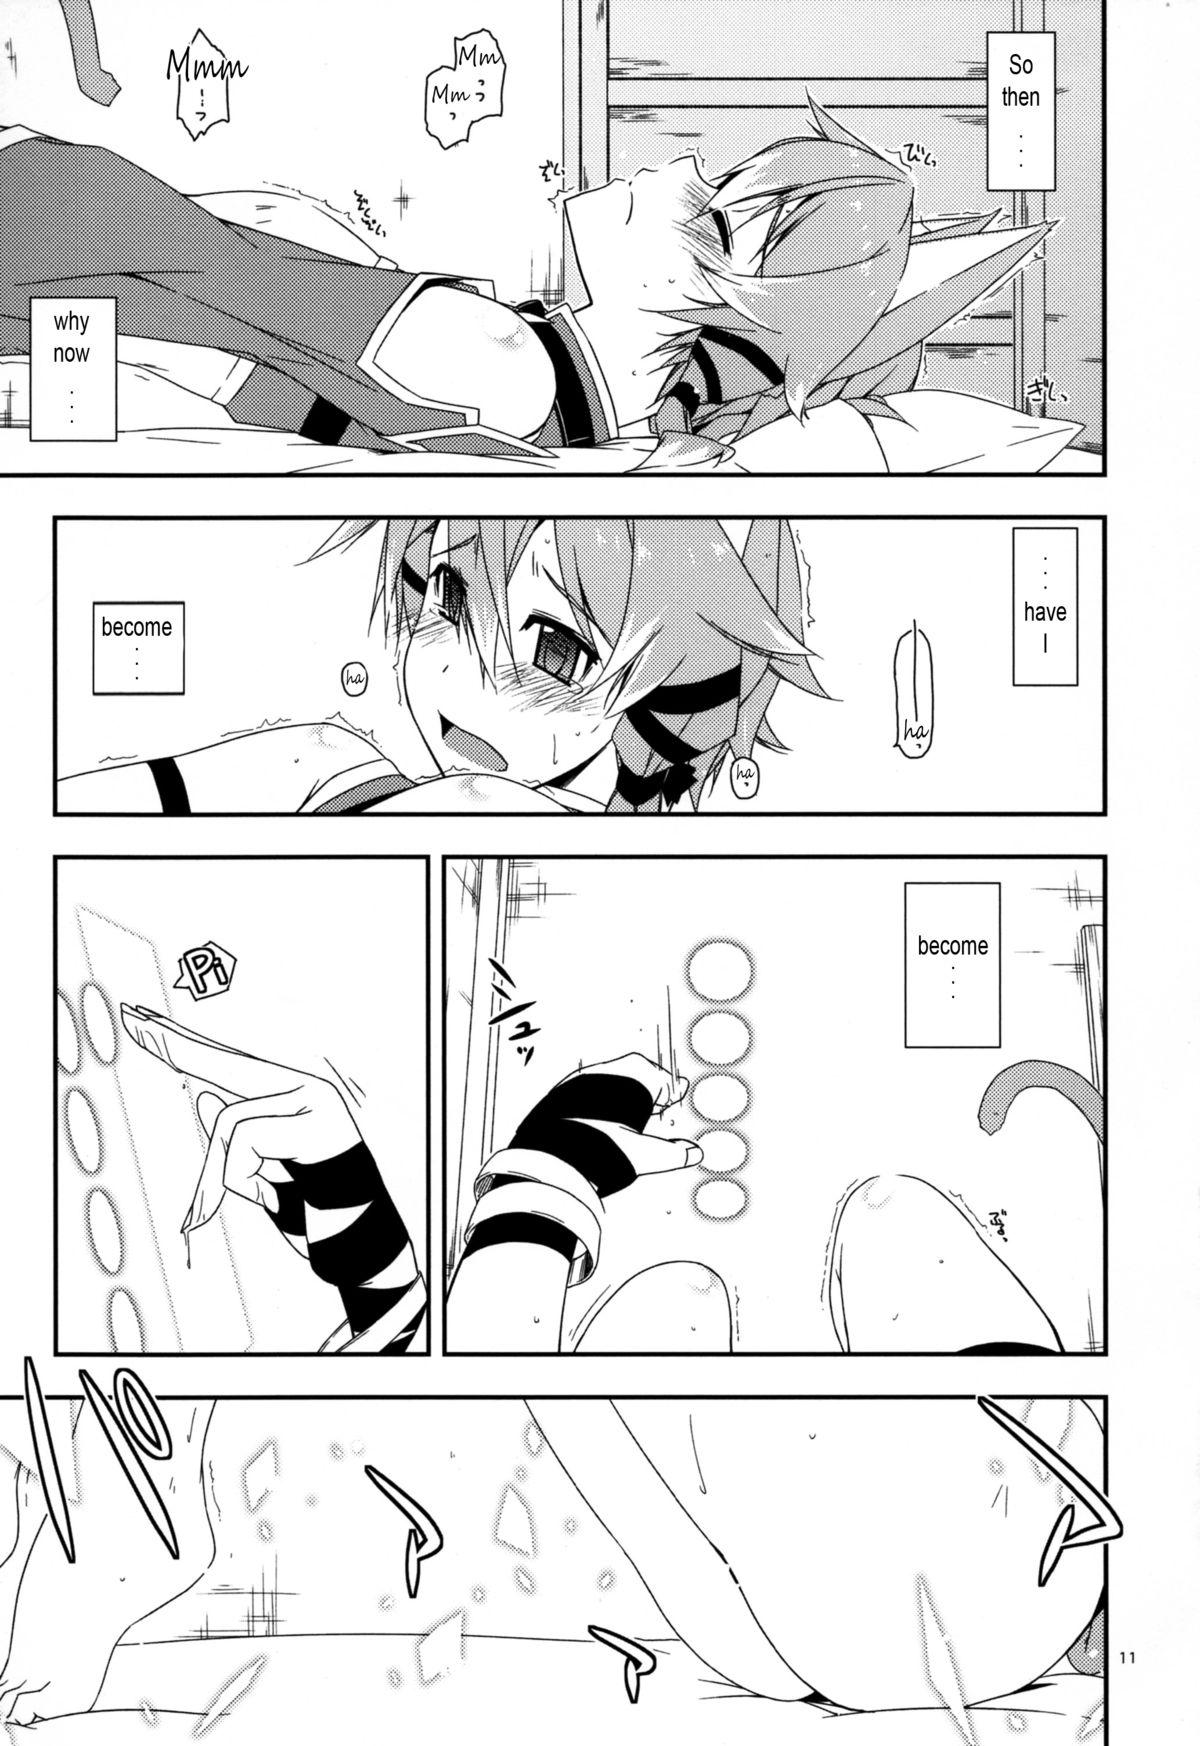 Gozada Difference - Sword art online Load - Page 11